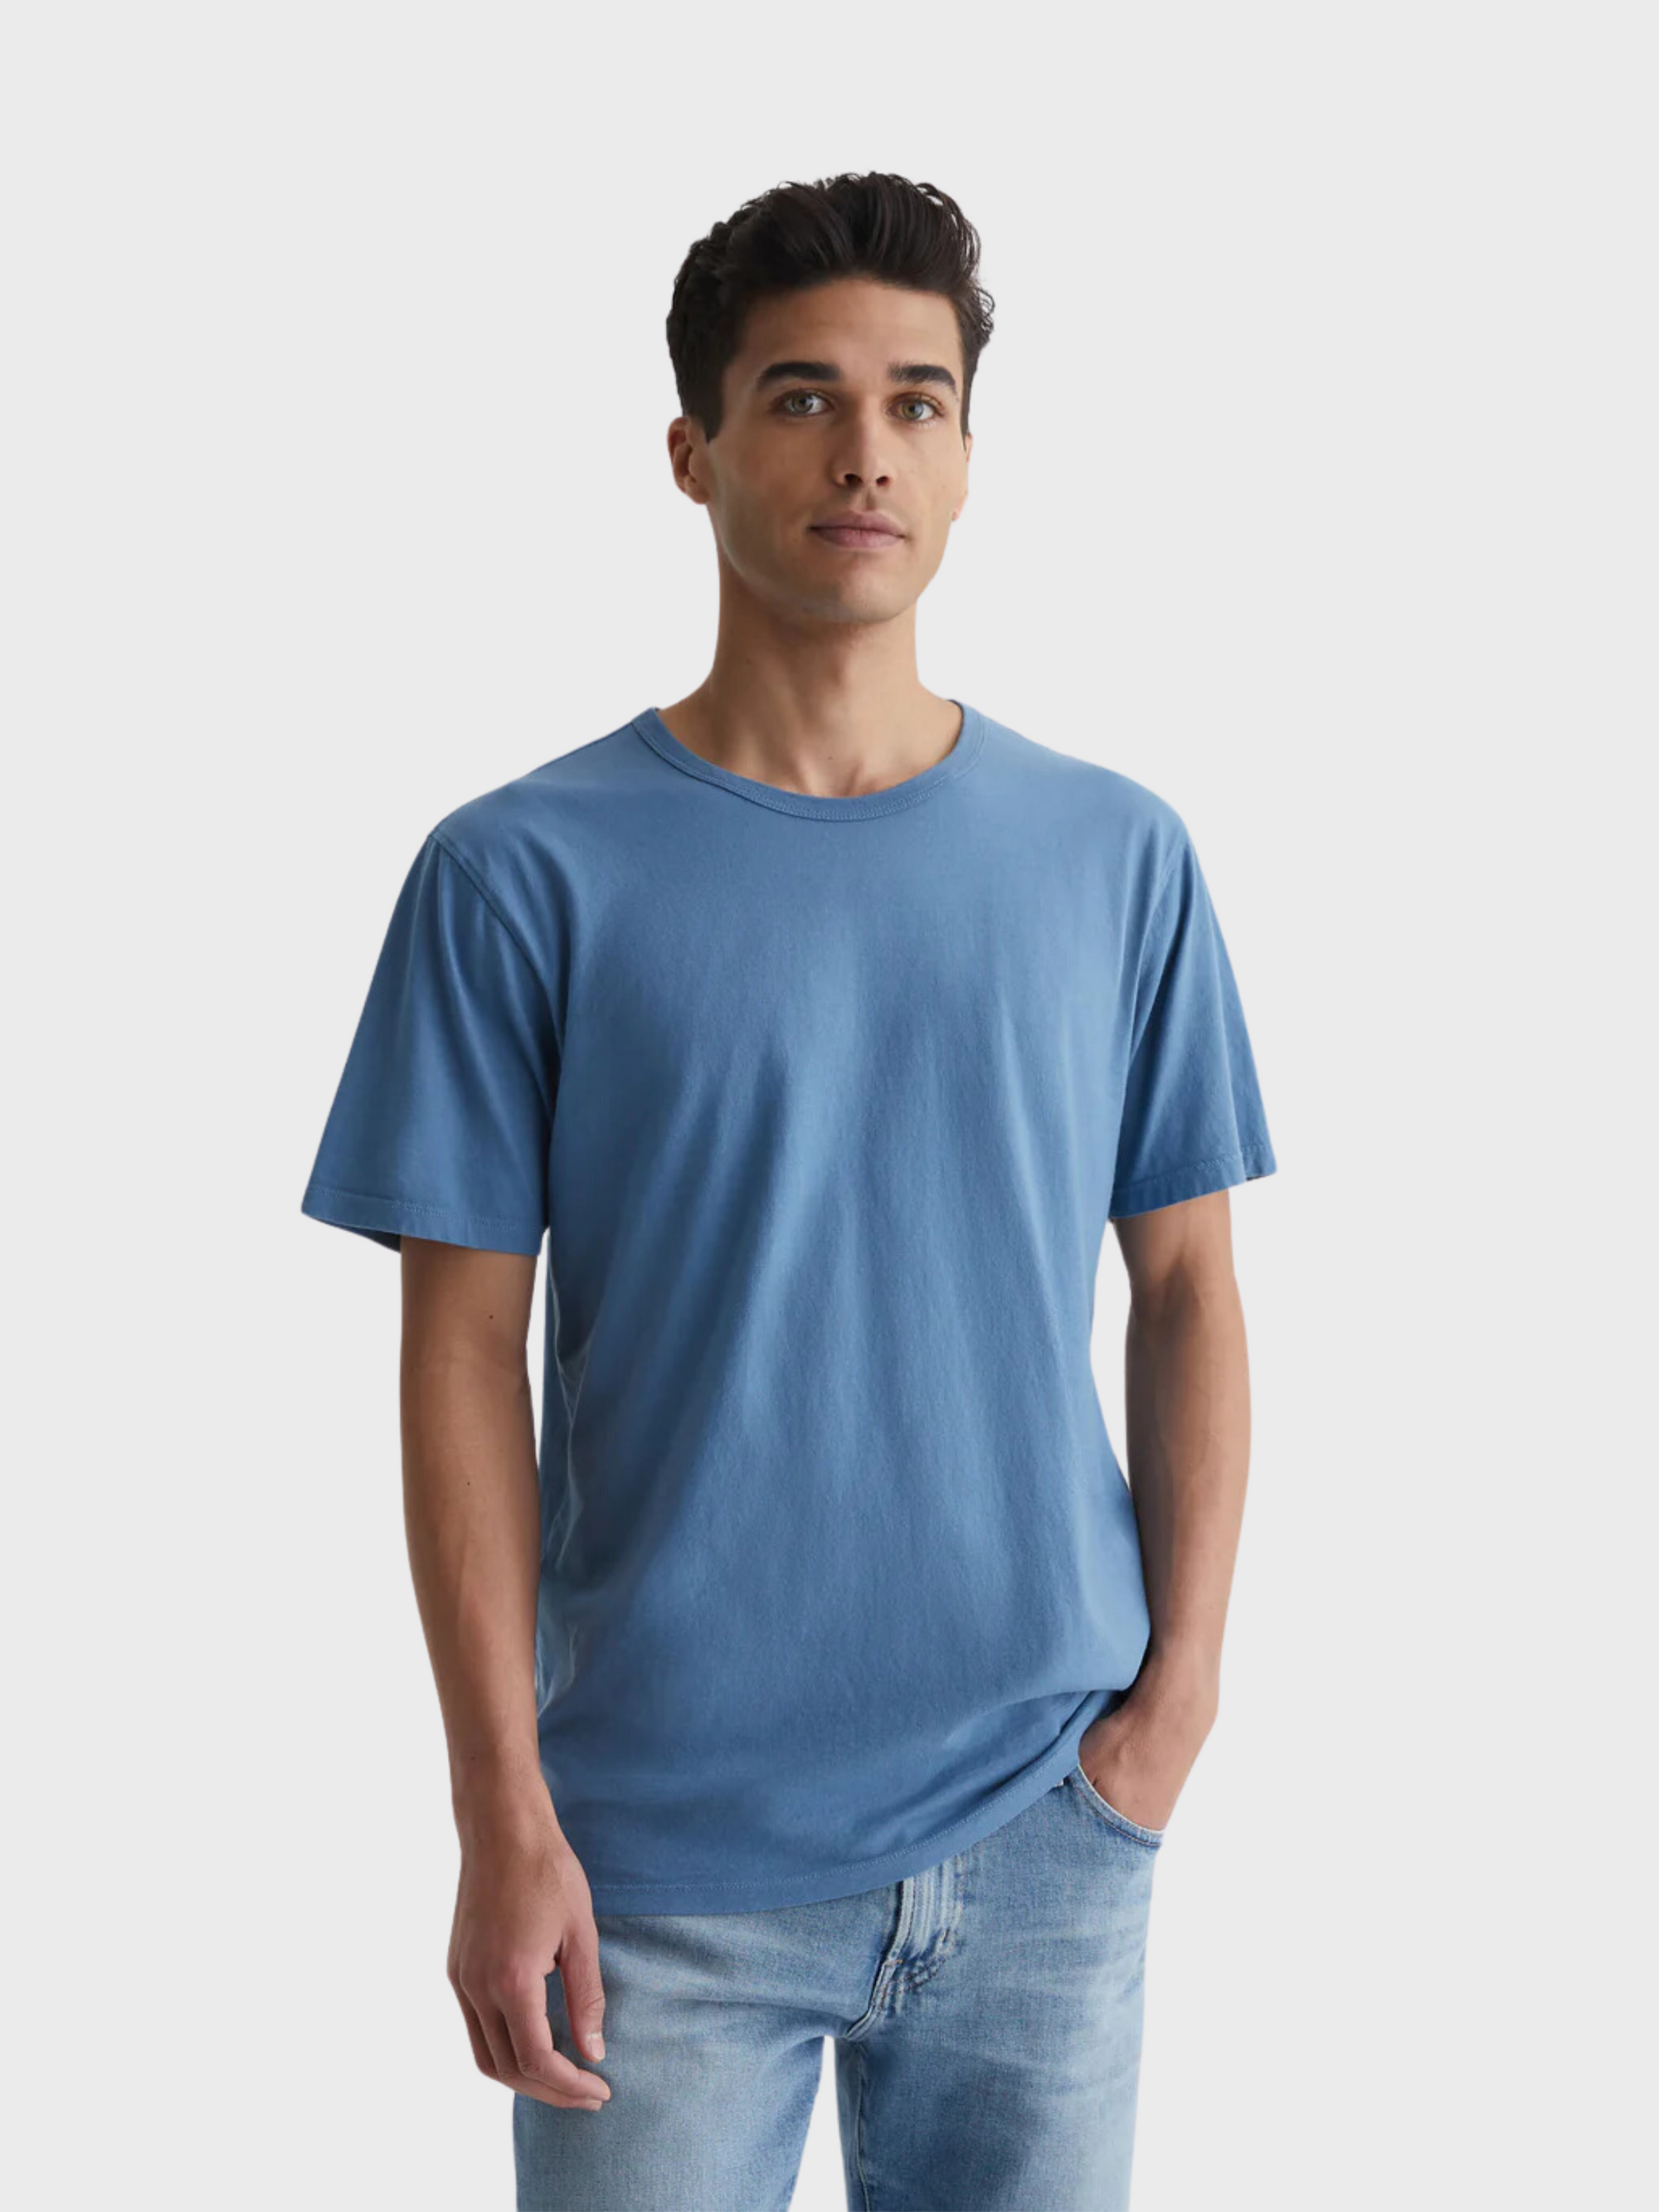 AG Bryce Crew Tee Crystal Blue SS24-Men's T-Shirts-S-Howard-Surrey-Canada